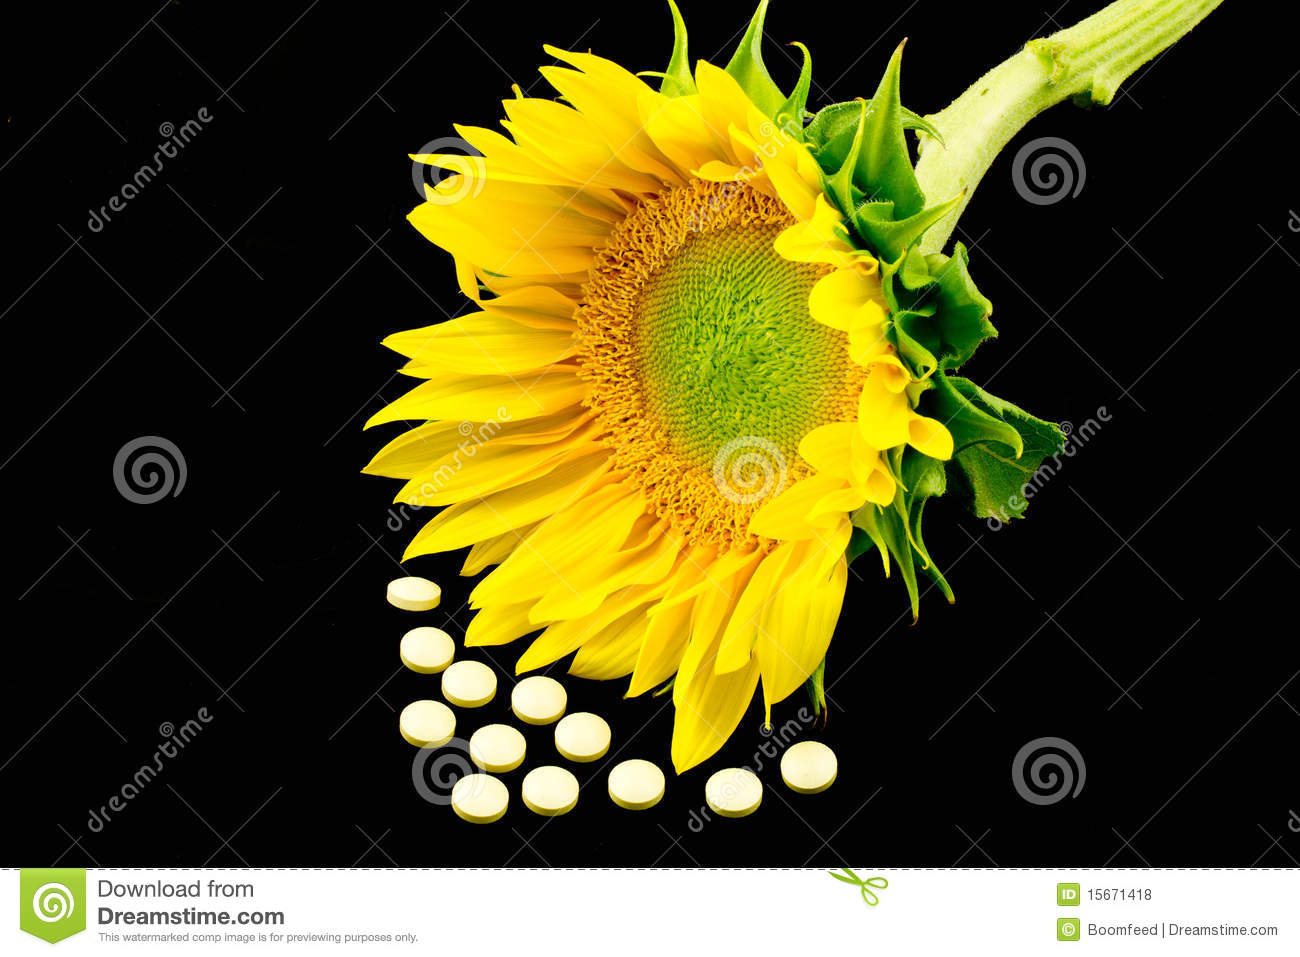 Vitamin D And Sunflower Royalty Free Stock Photos   Image  15671418